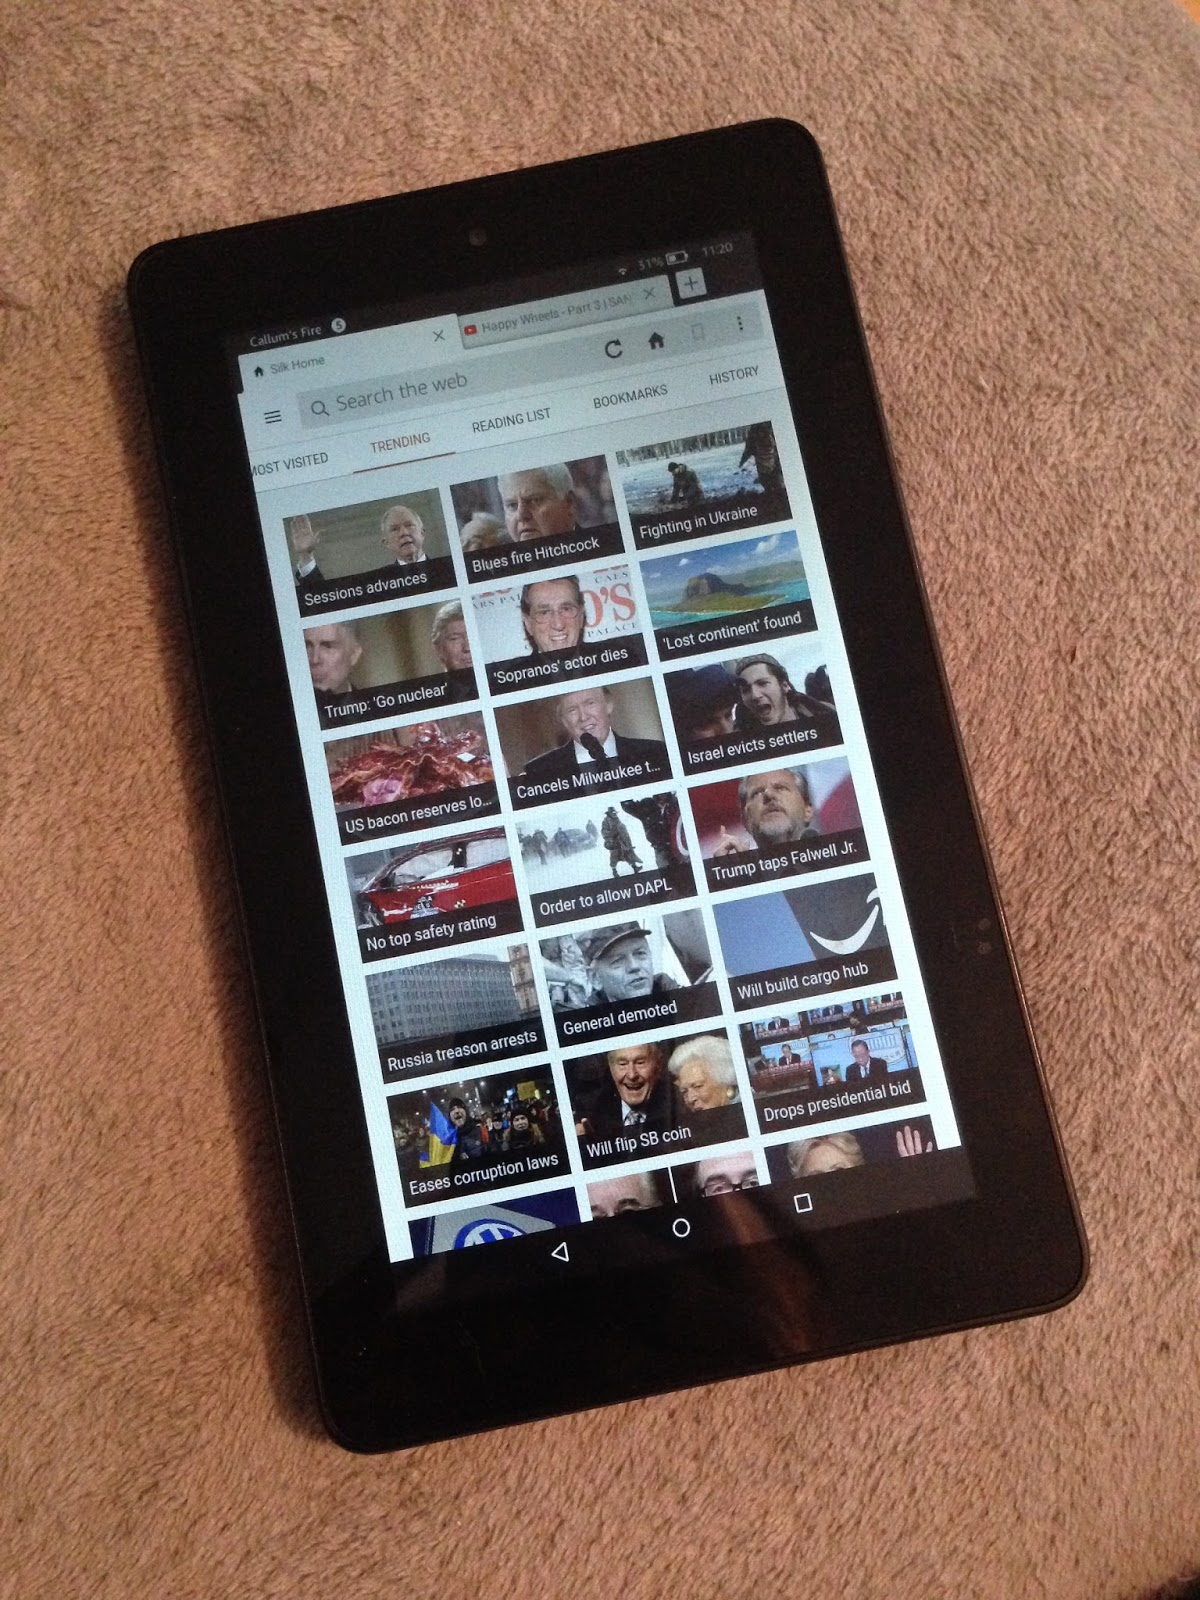 kindle fire 5th generation review